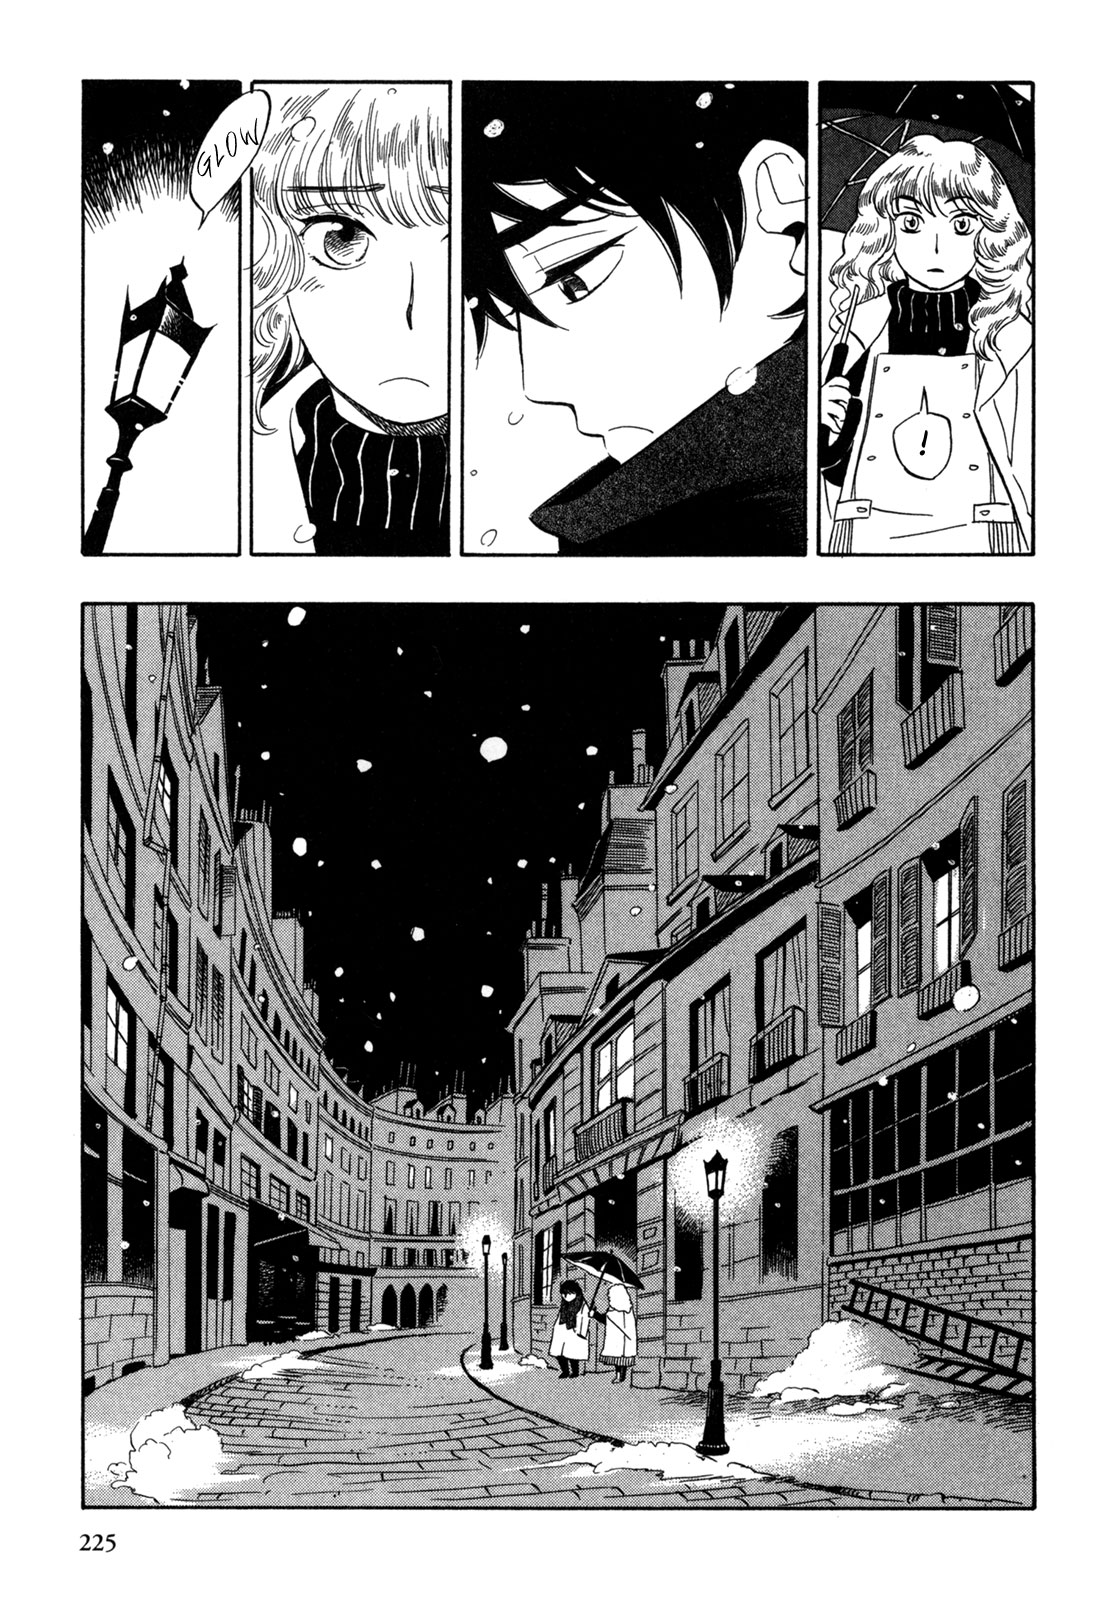 A Tale of Royal Disturbance: Now He's Gone from Echo Valley Vol. 1 Ch. 7 Fuku’s Many Travels